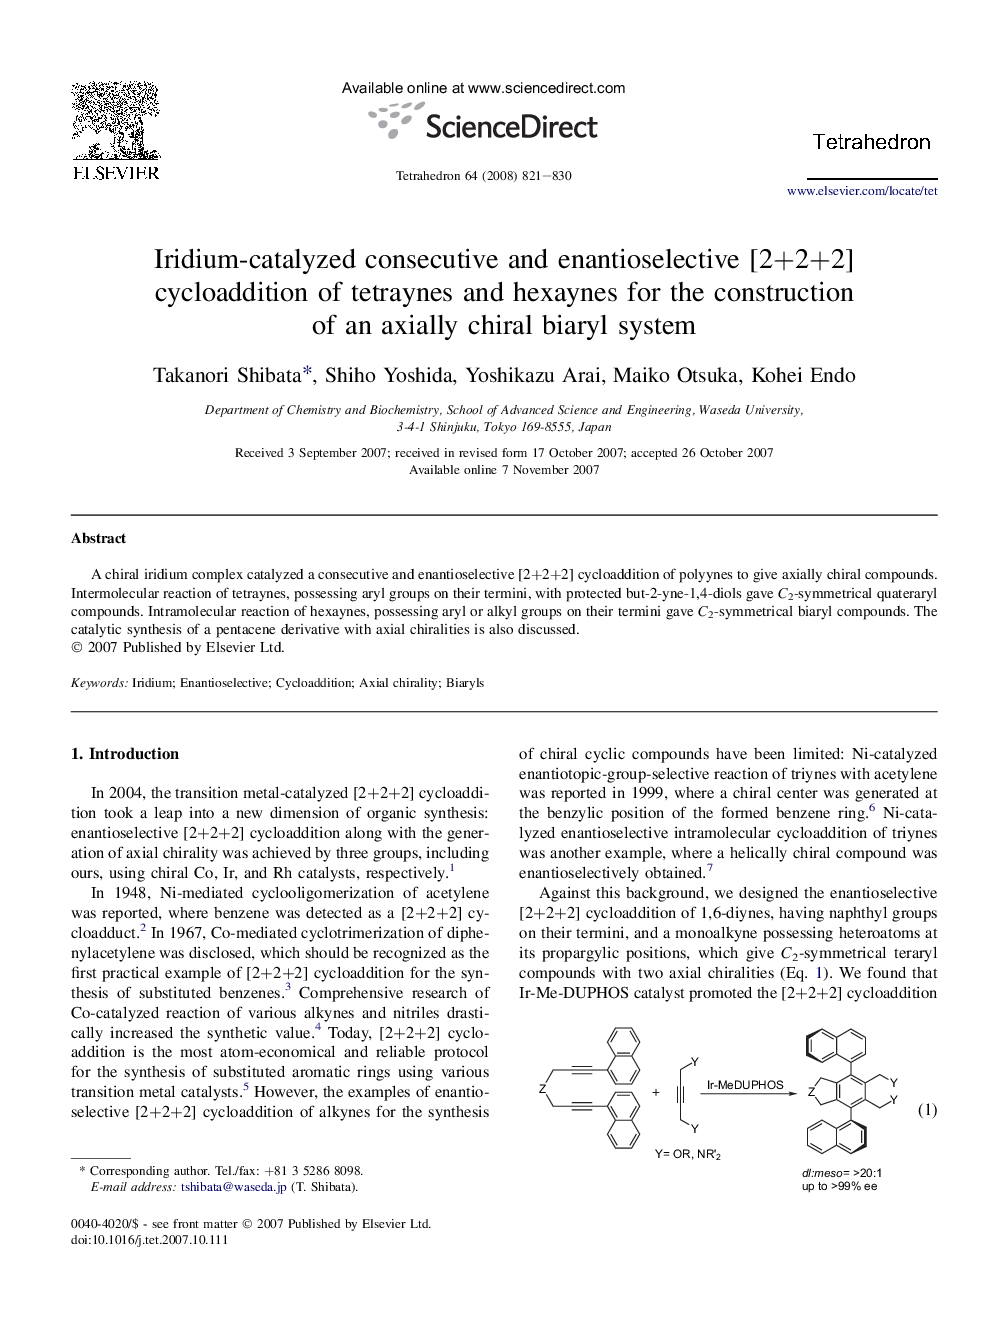 Iridium-catalyzed consecutive and enantioselective [2+2+2] cycloaddition of tetraynes and hexaynes for the construction of an axially chiral biaryl system